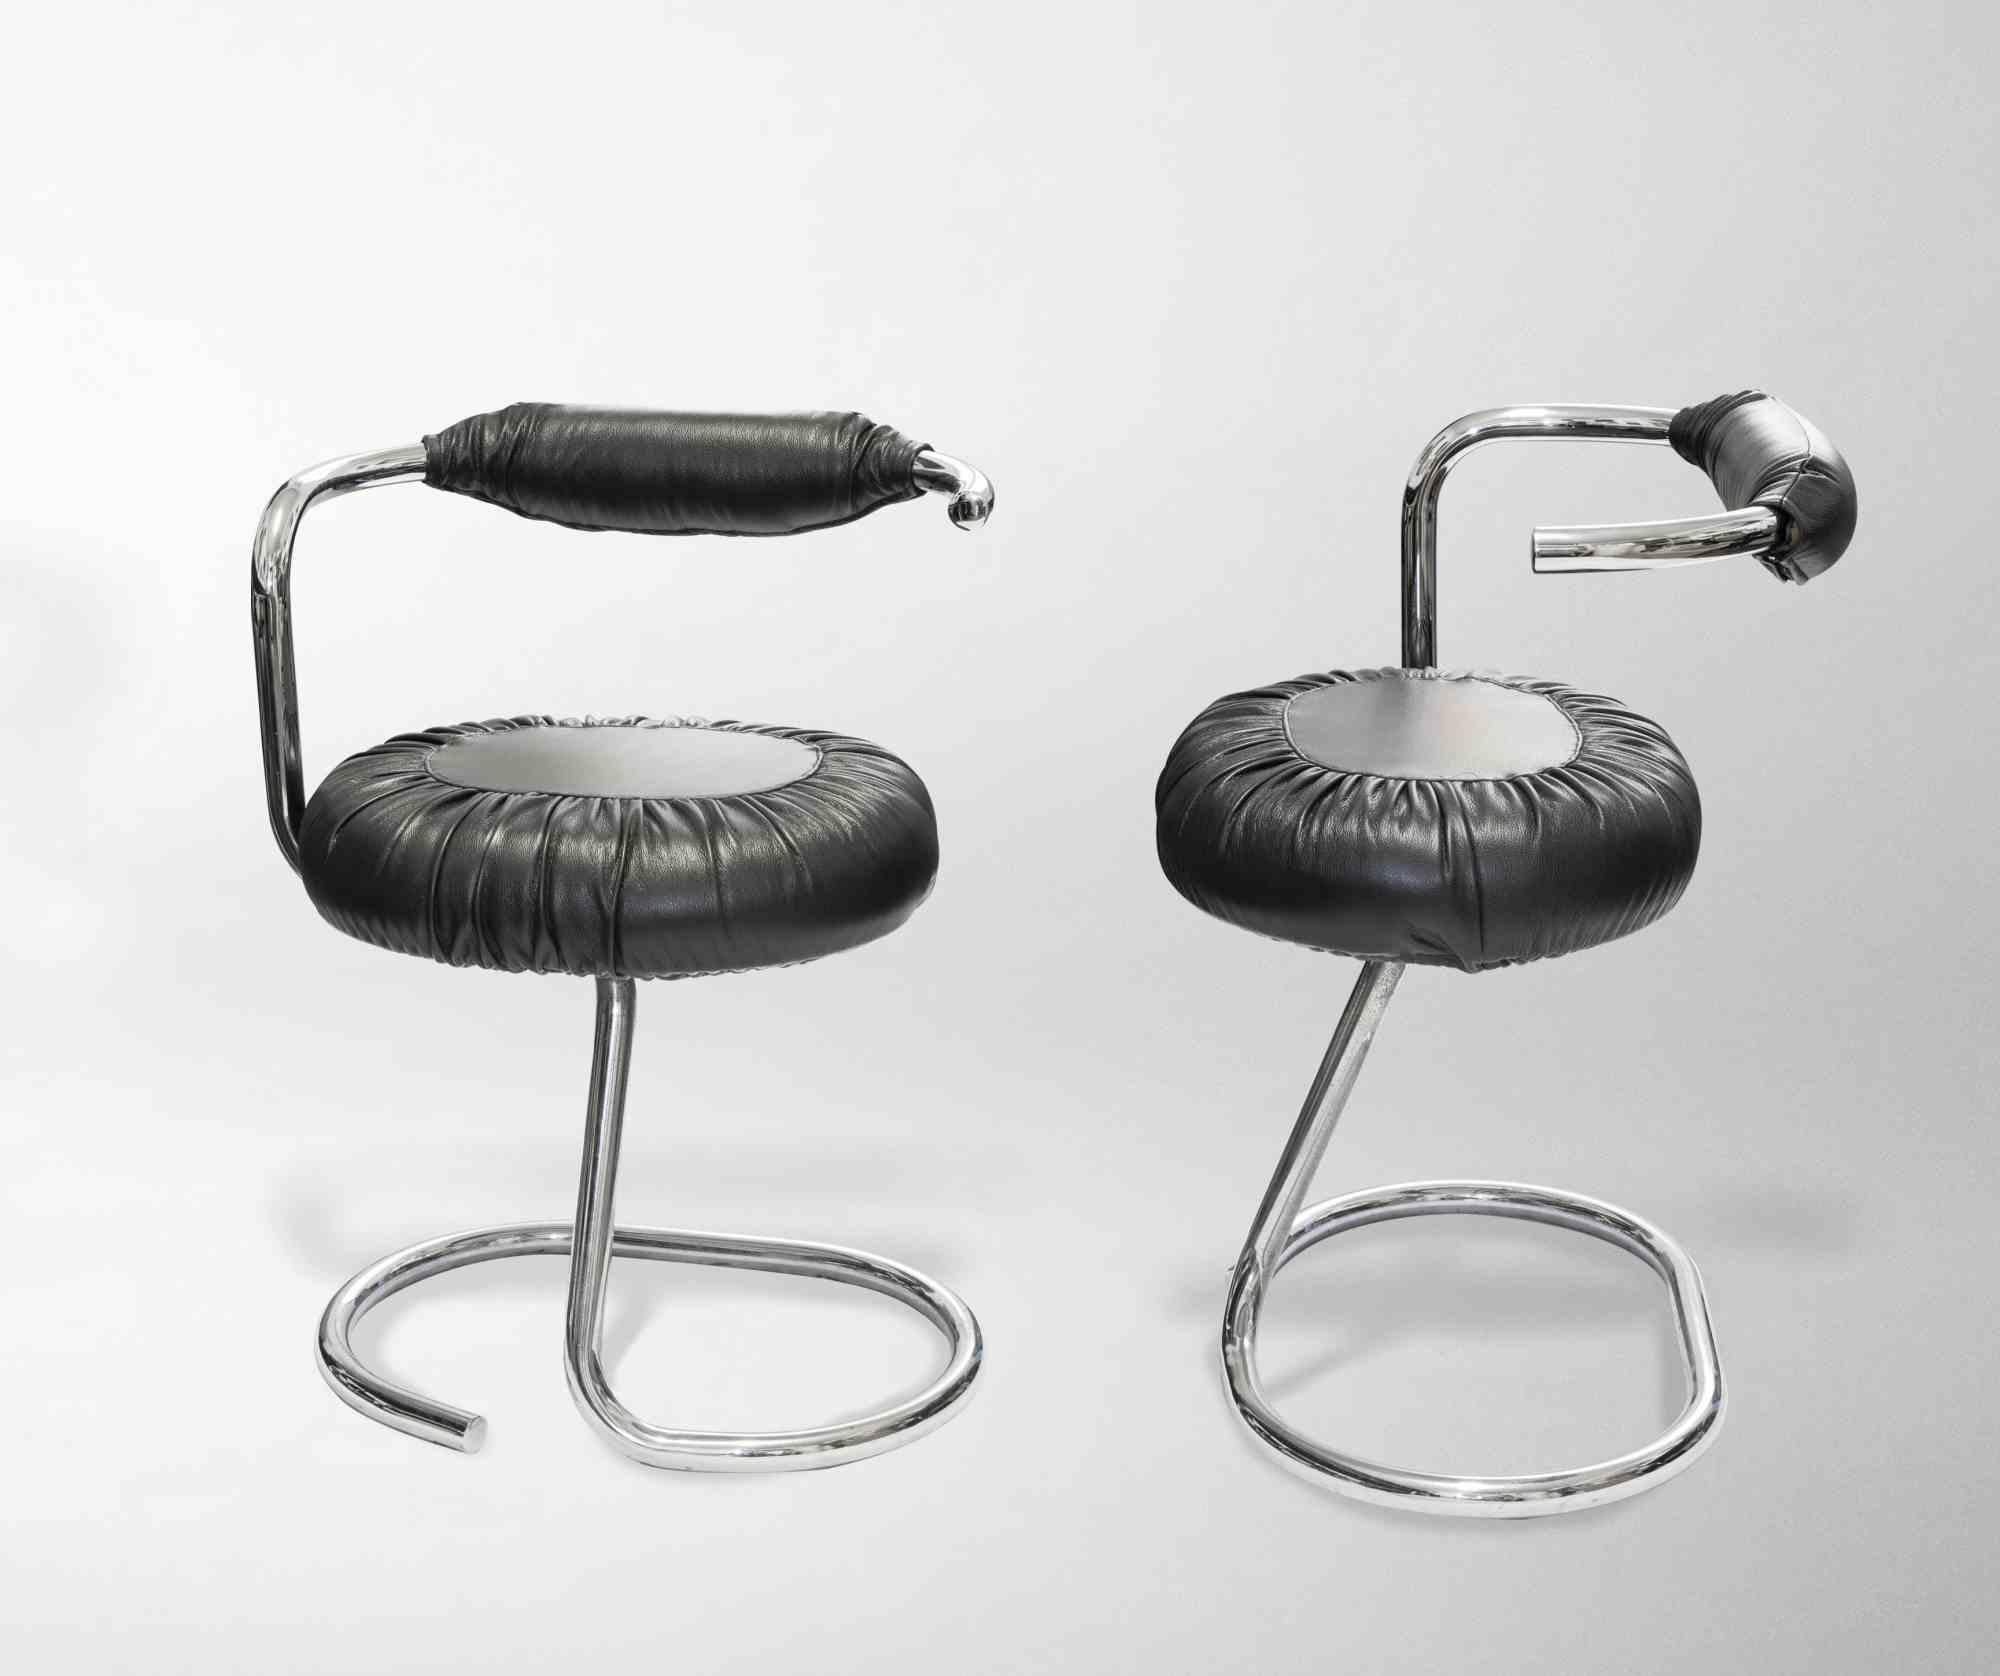 Black Cobra chairs is an original set of chairs realized in the 1970s by Giotto Stoppino (Milan, 1926).

Chromed tubular steel structure and black leather

This 'Cobra' chair was designed by Giotto Stoppino during the 1970s and produced in